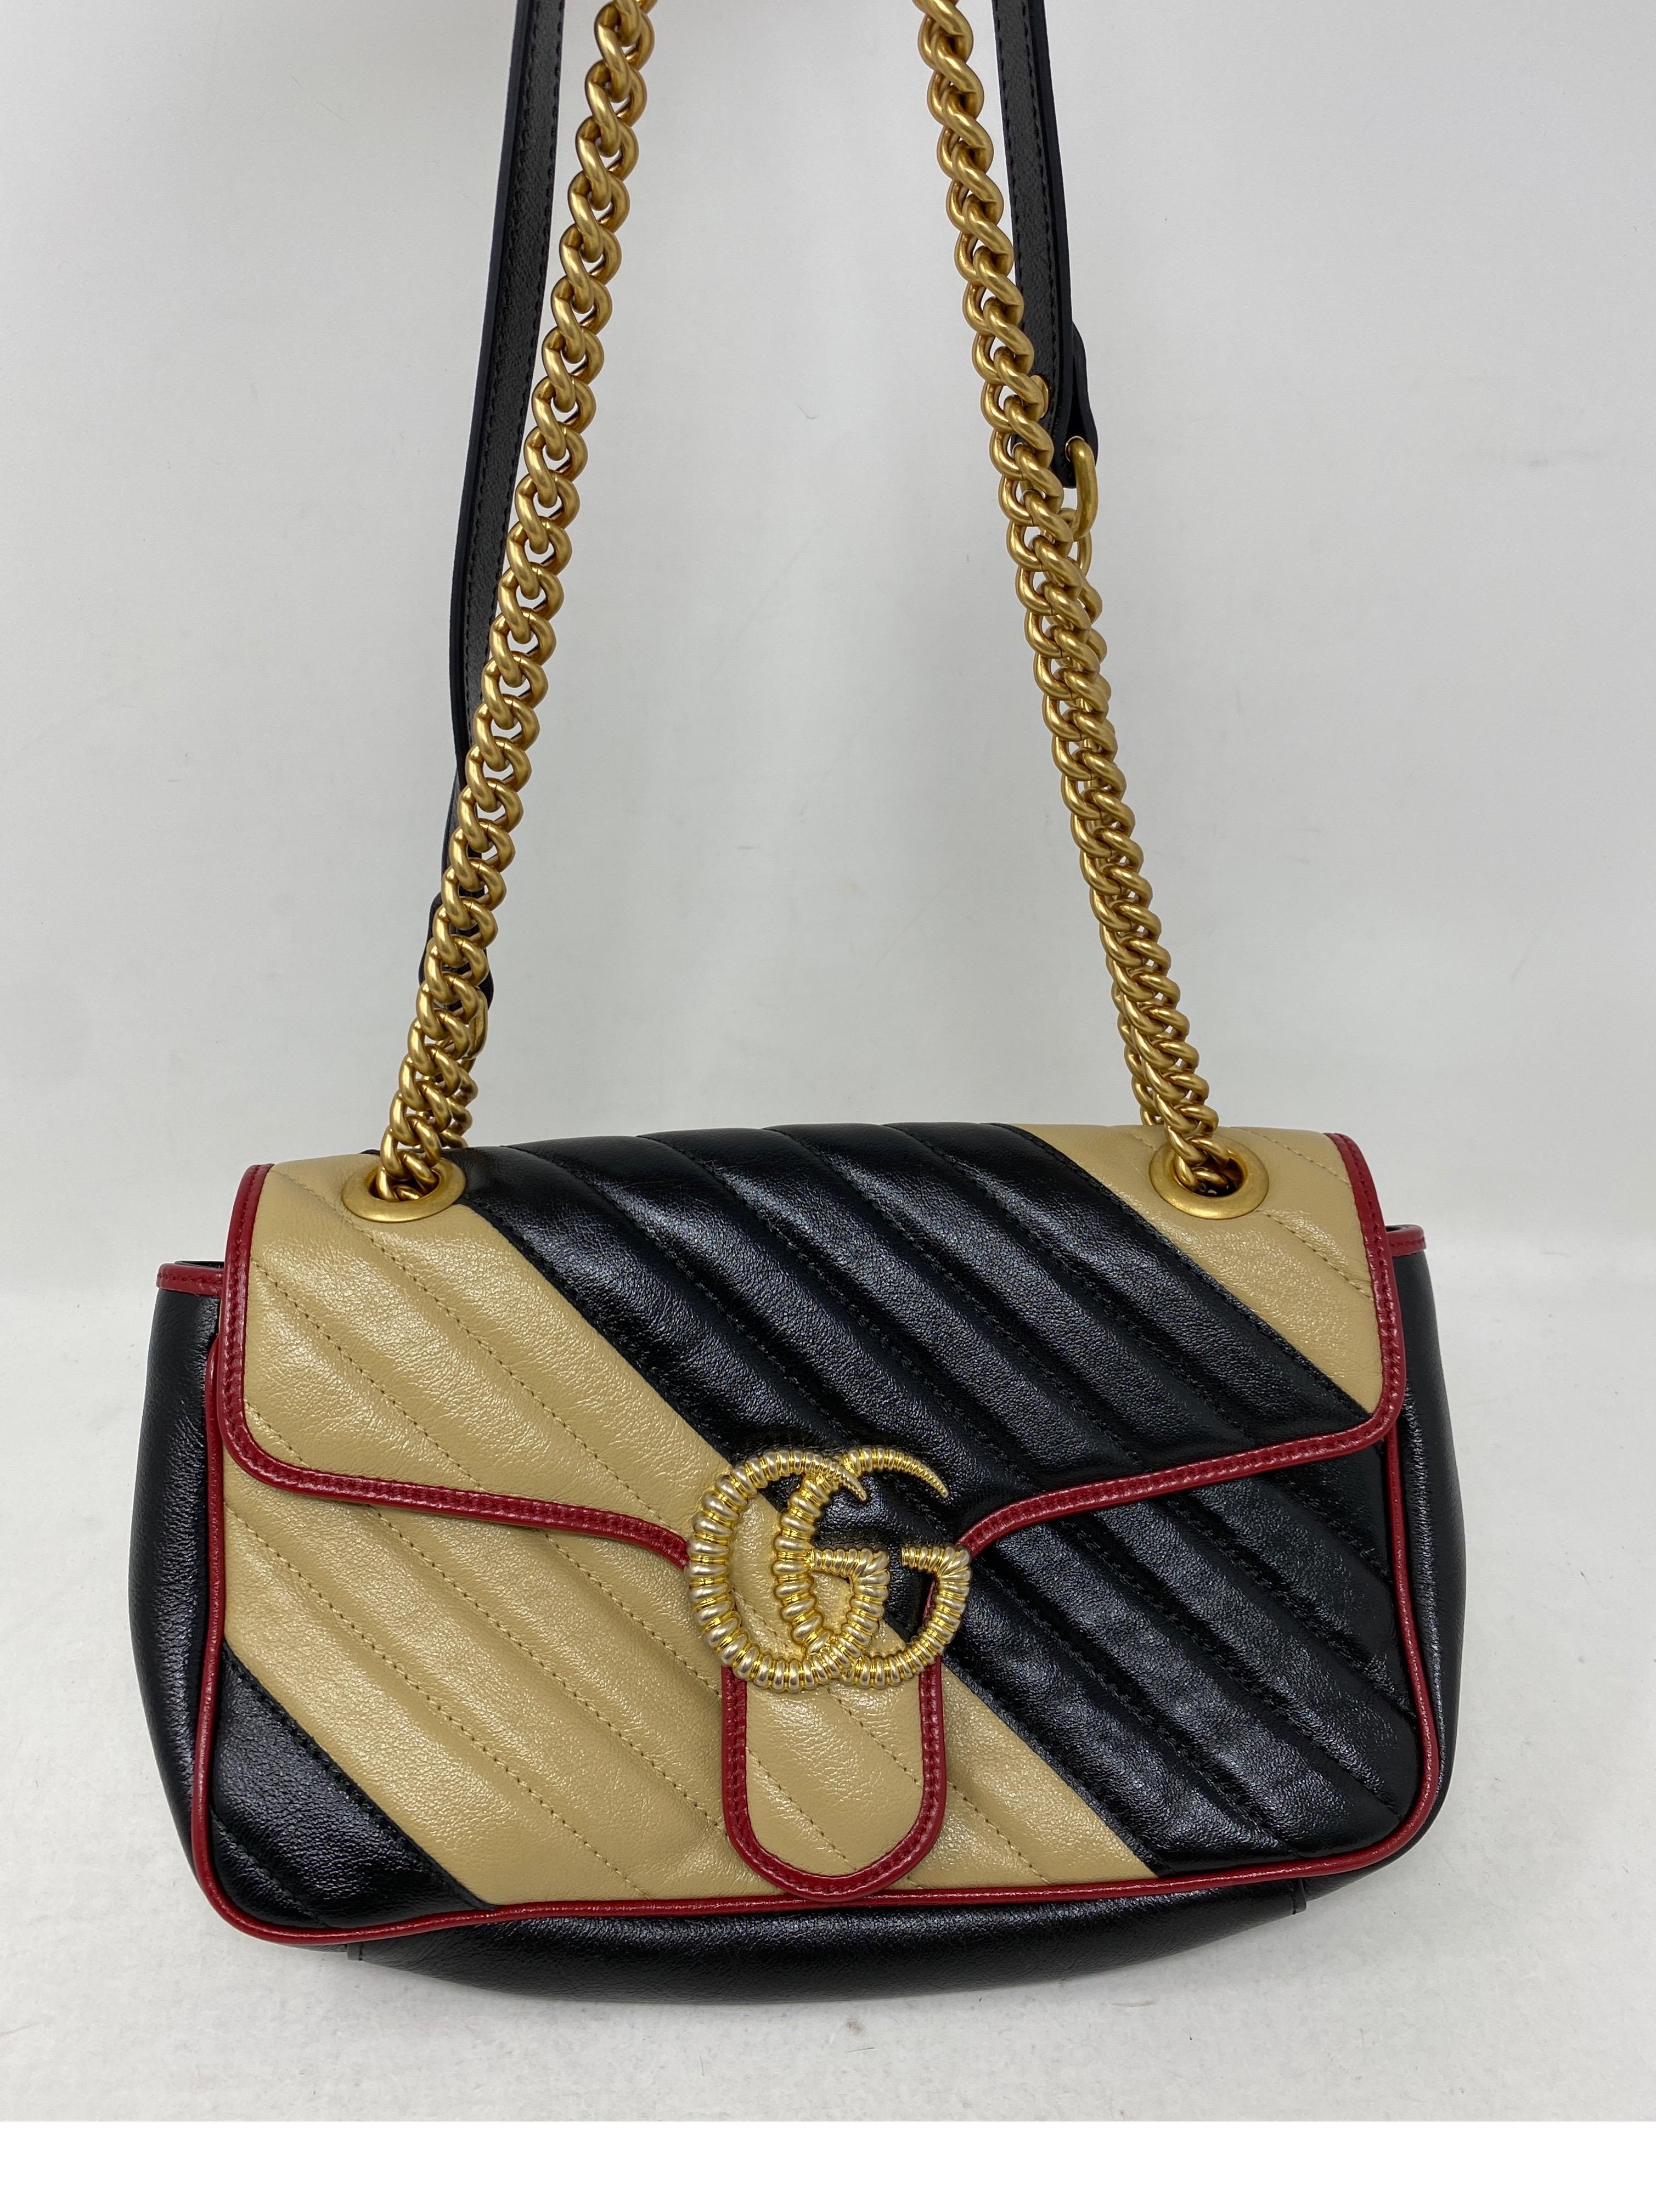 gucci marmont bag black and red